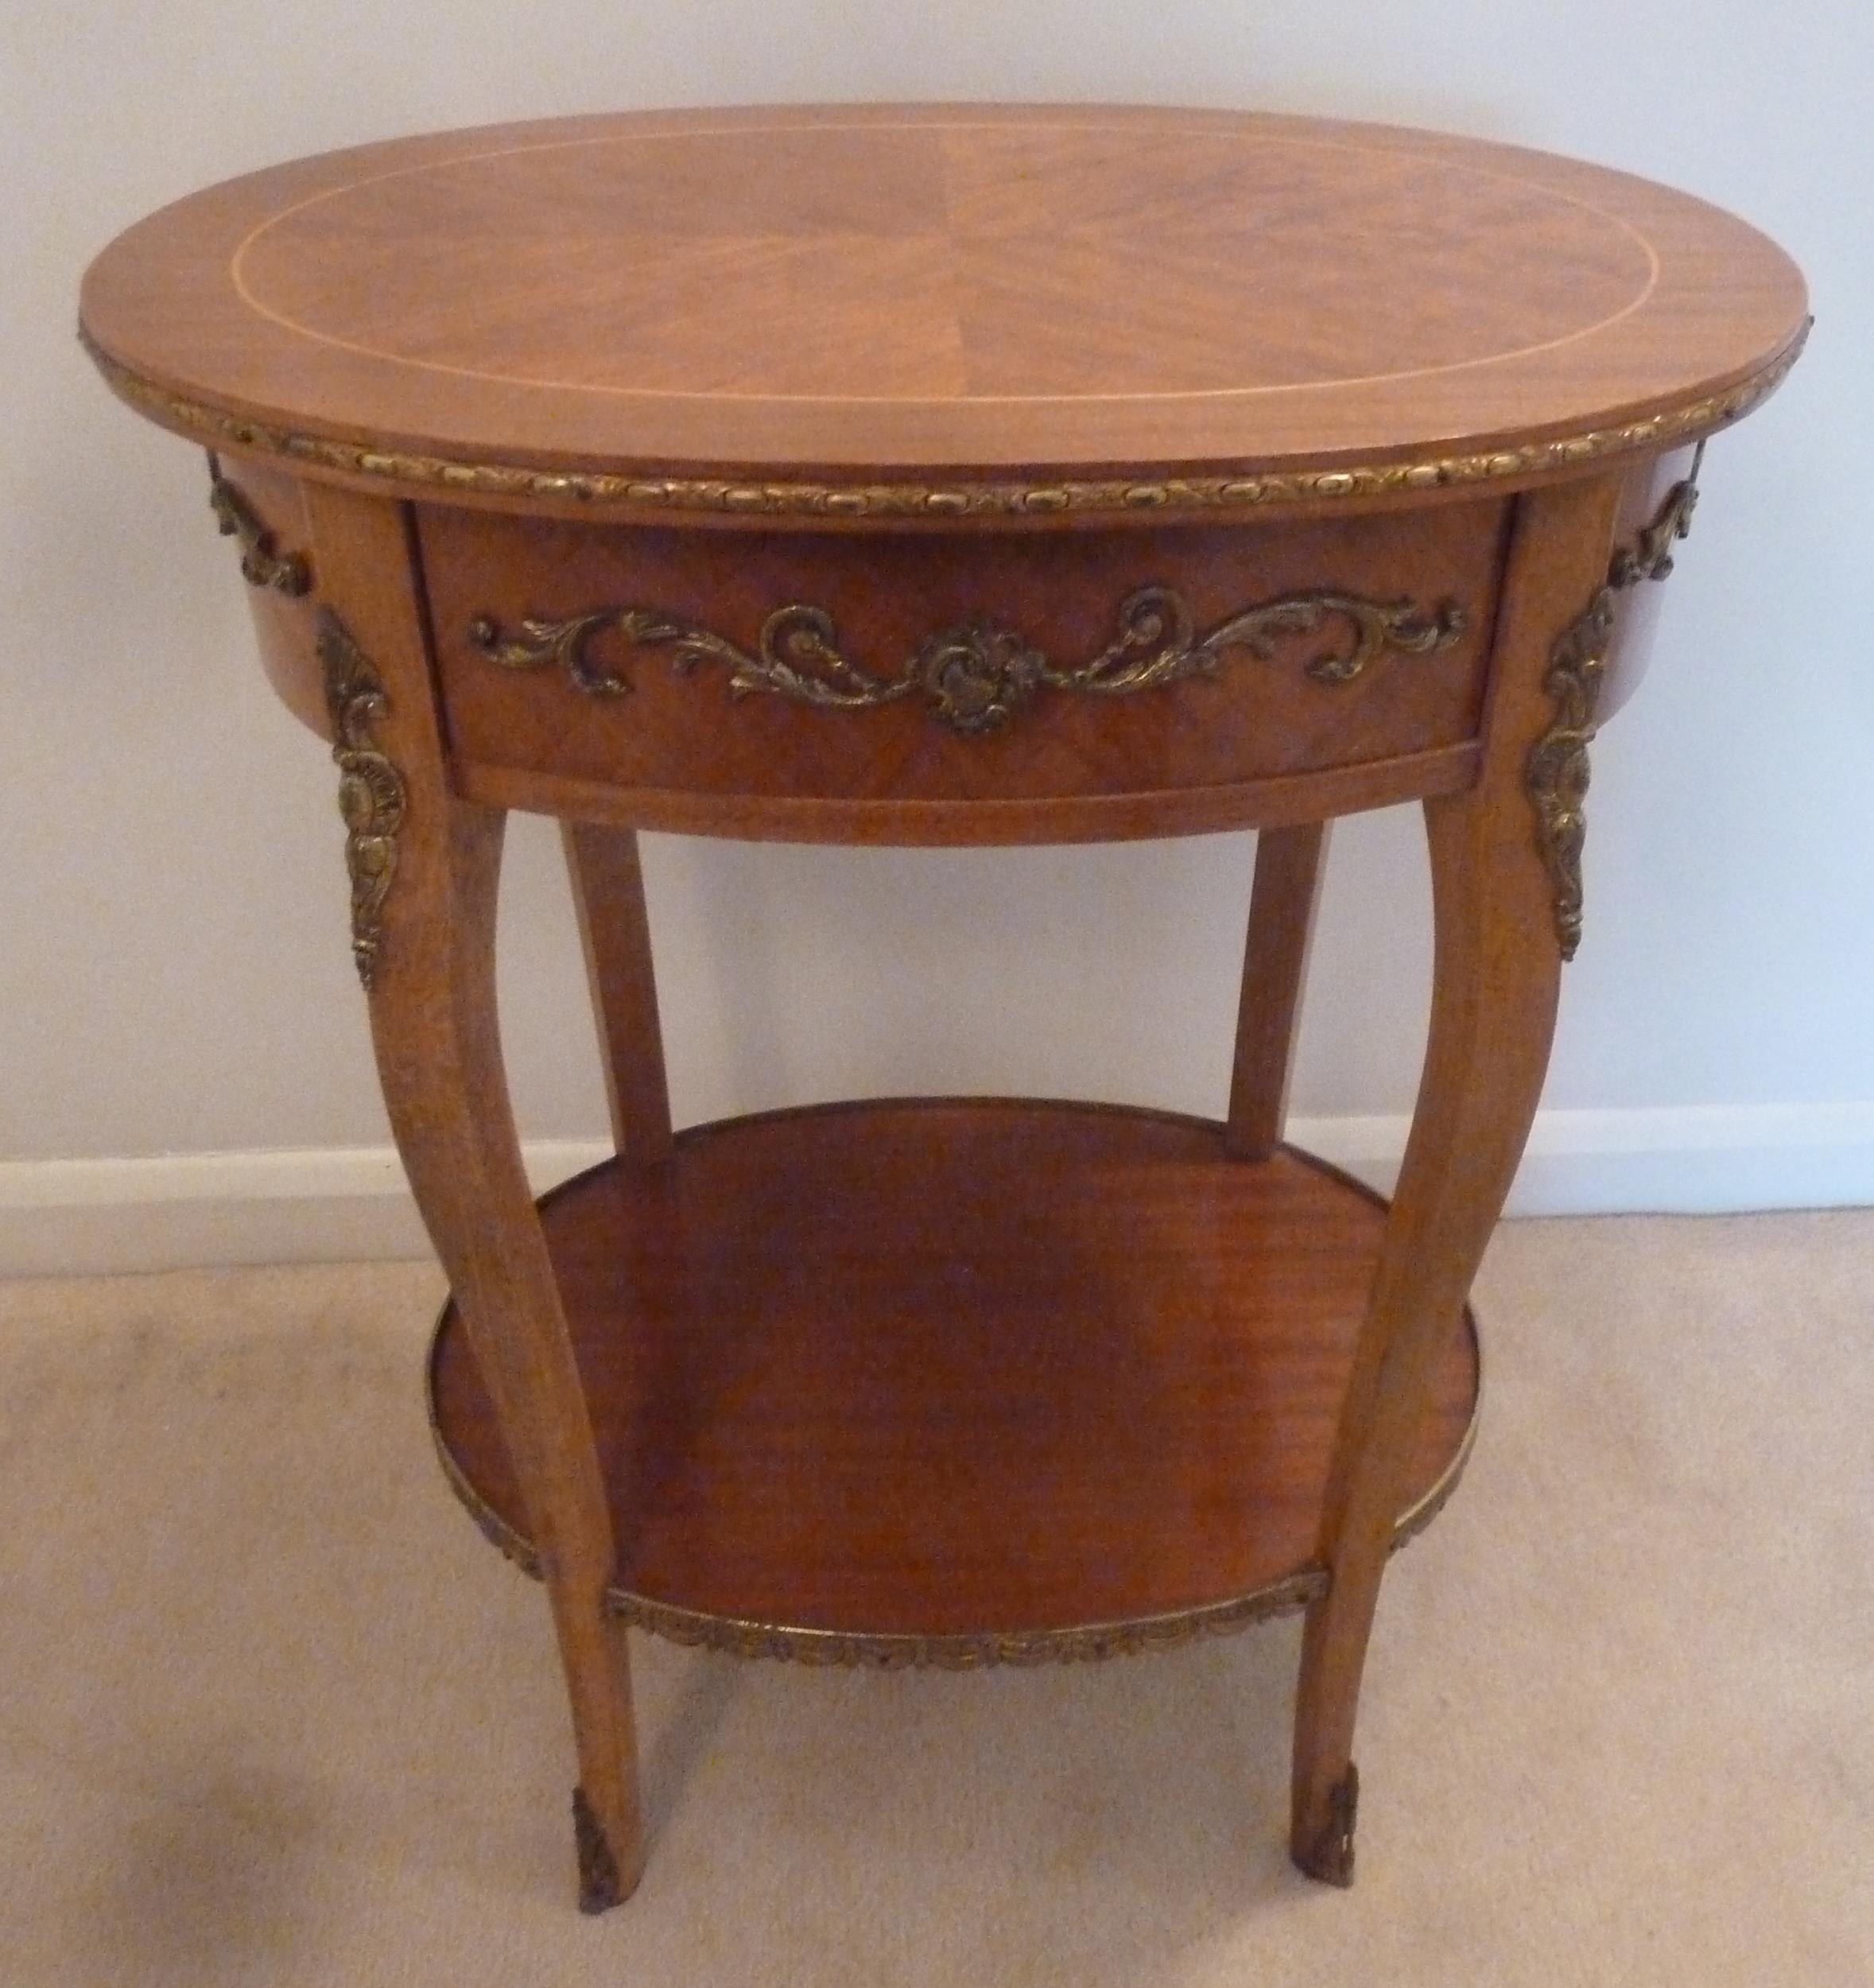 An oval mahogany and Kingswood side table with applied gilded mounts and a single drawer on four